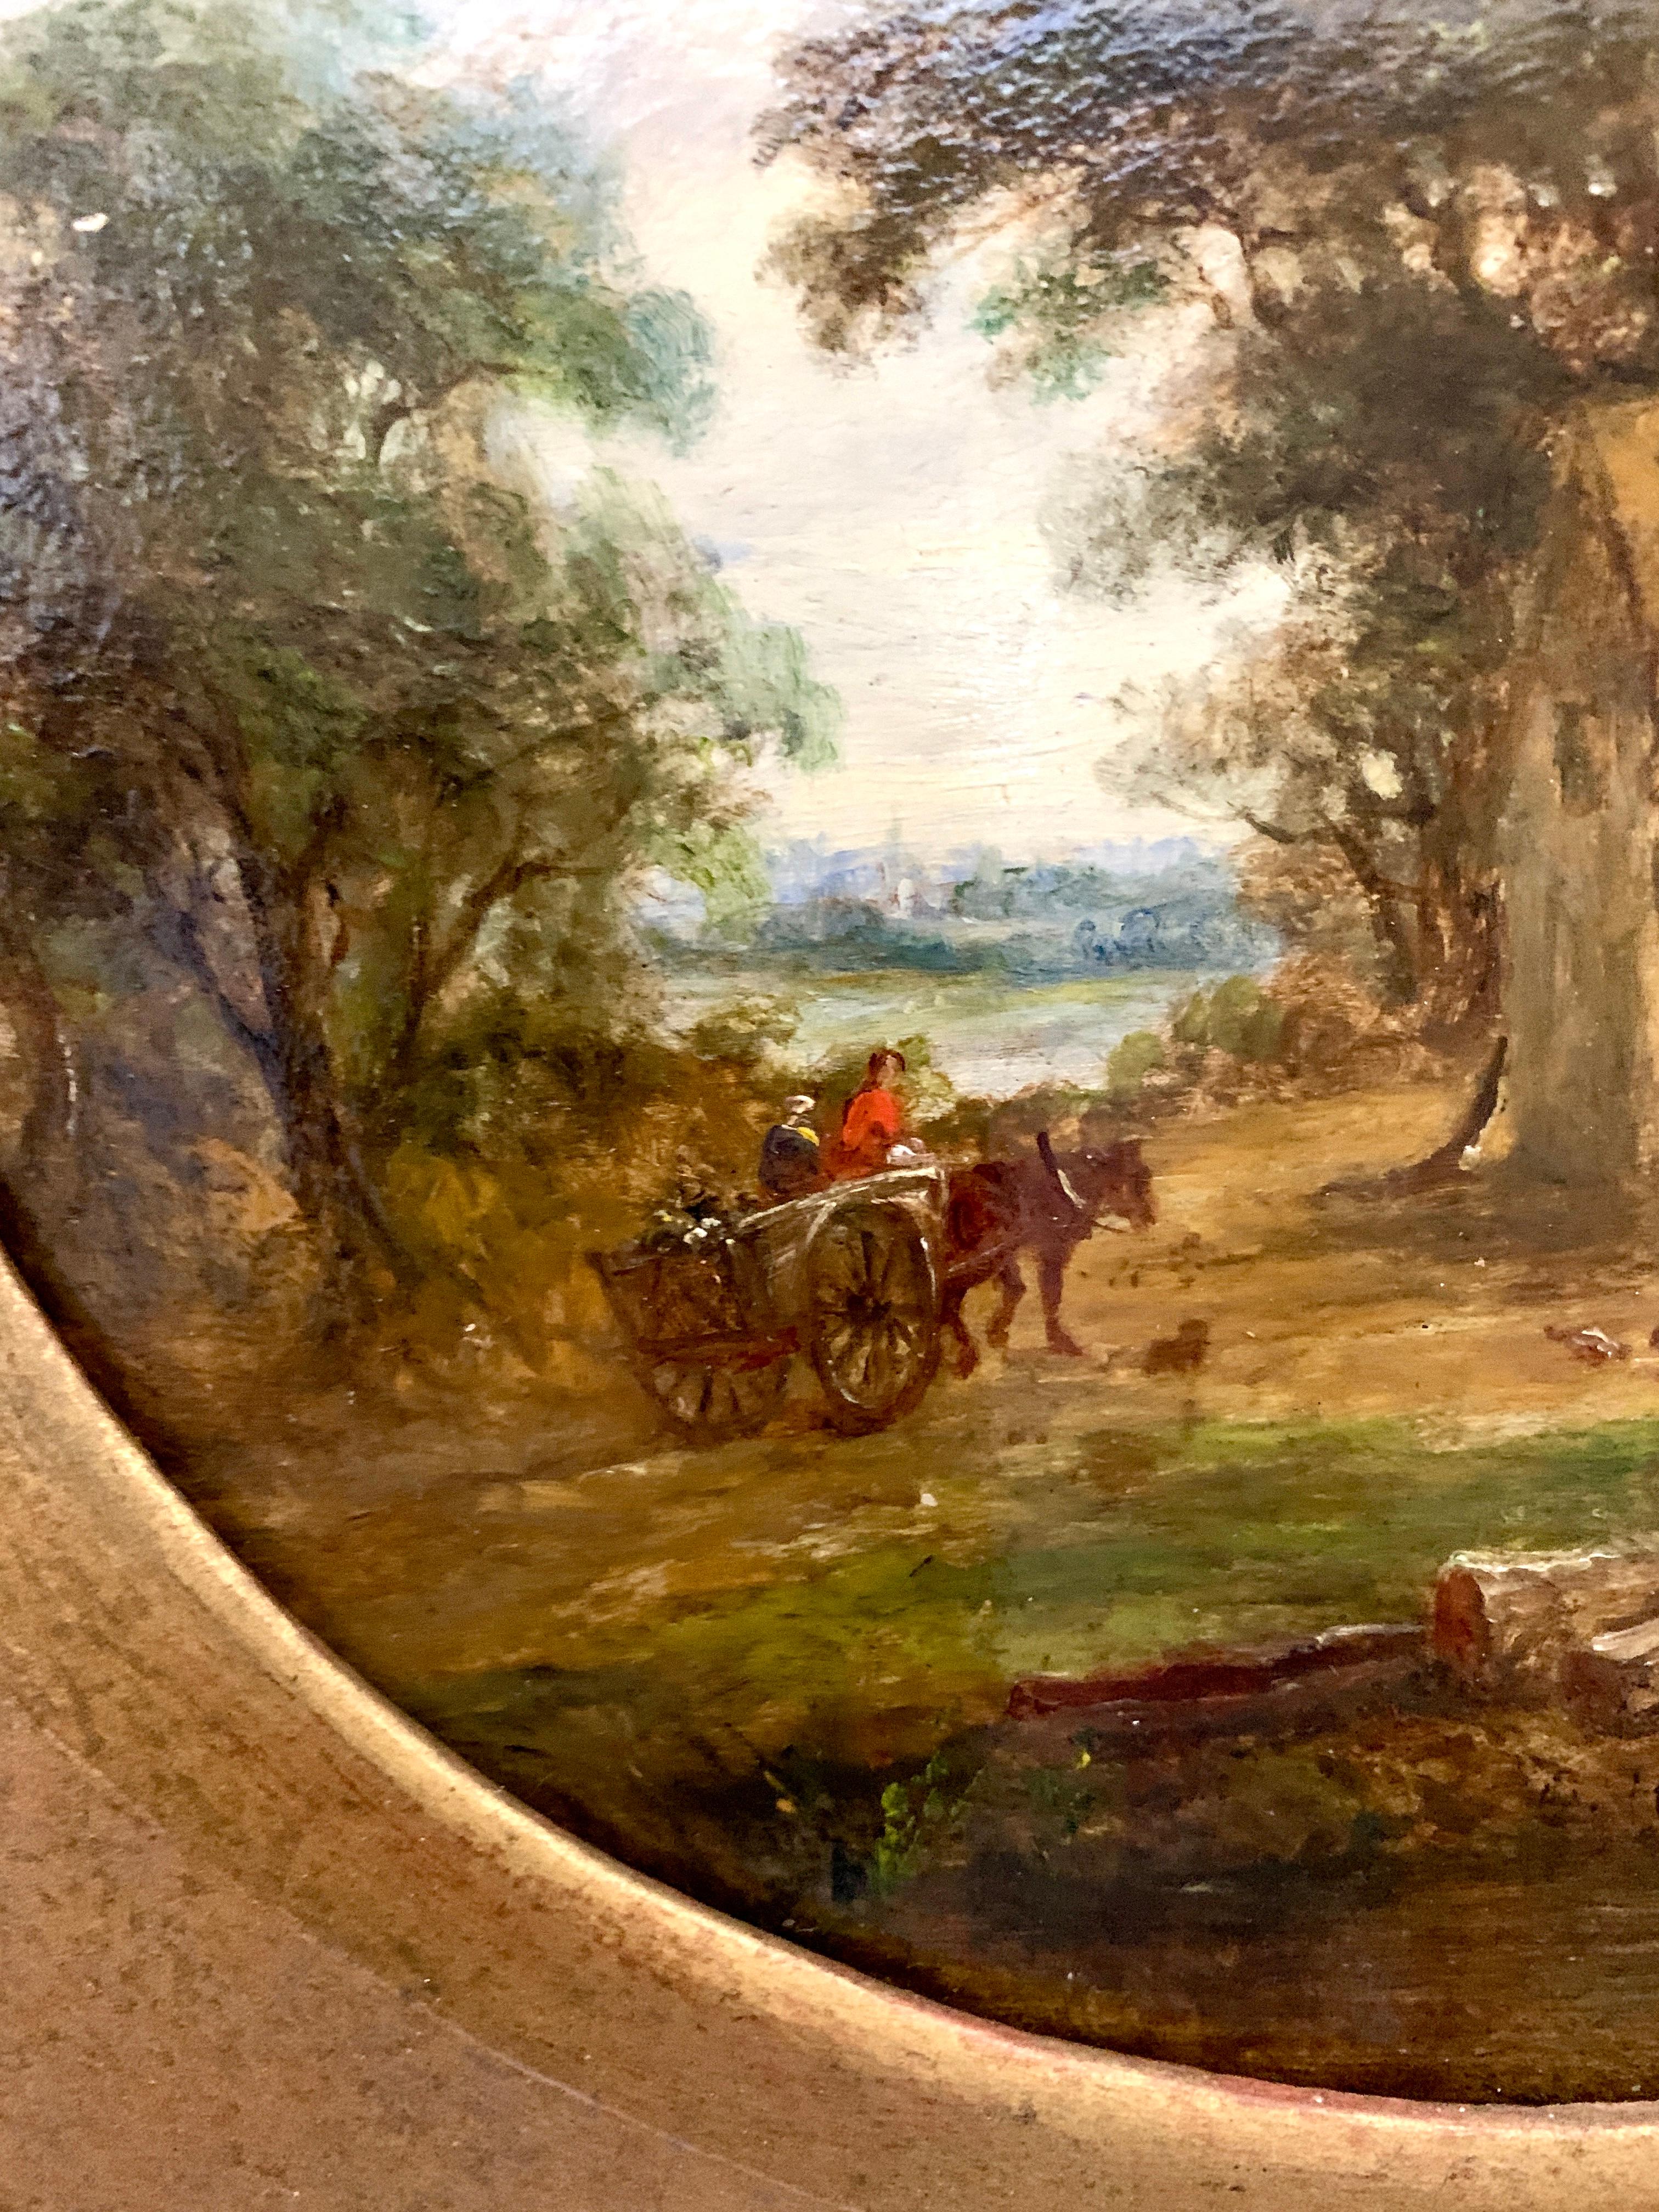 Wonderful pair of Victorian English 19th century antique landscapes, with Cottages, people horses, carts chickens etc. 

Robert Burrows, was born in Ipswich in 1810, eldest son of Robert Burrows senior (1782-1863) who was a silversmith in the Old